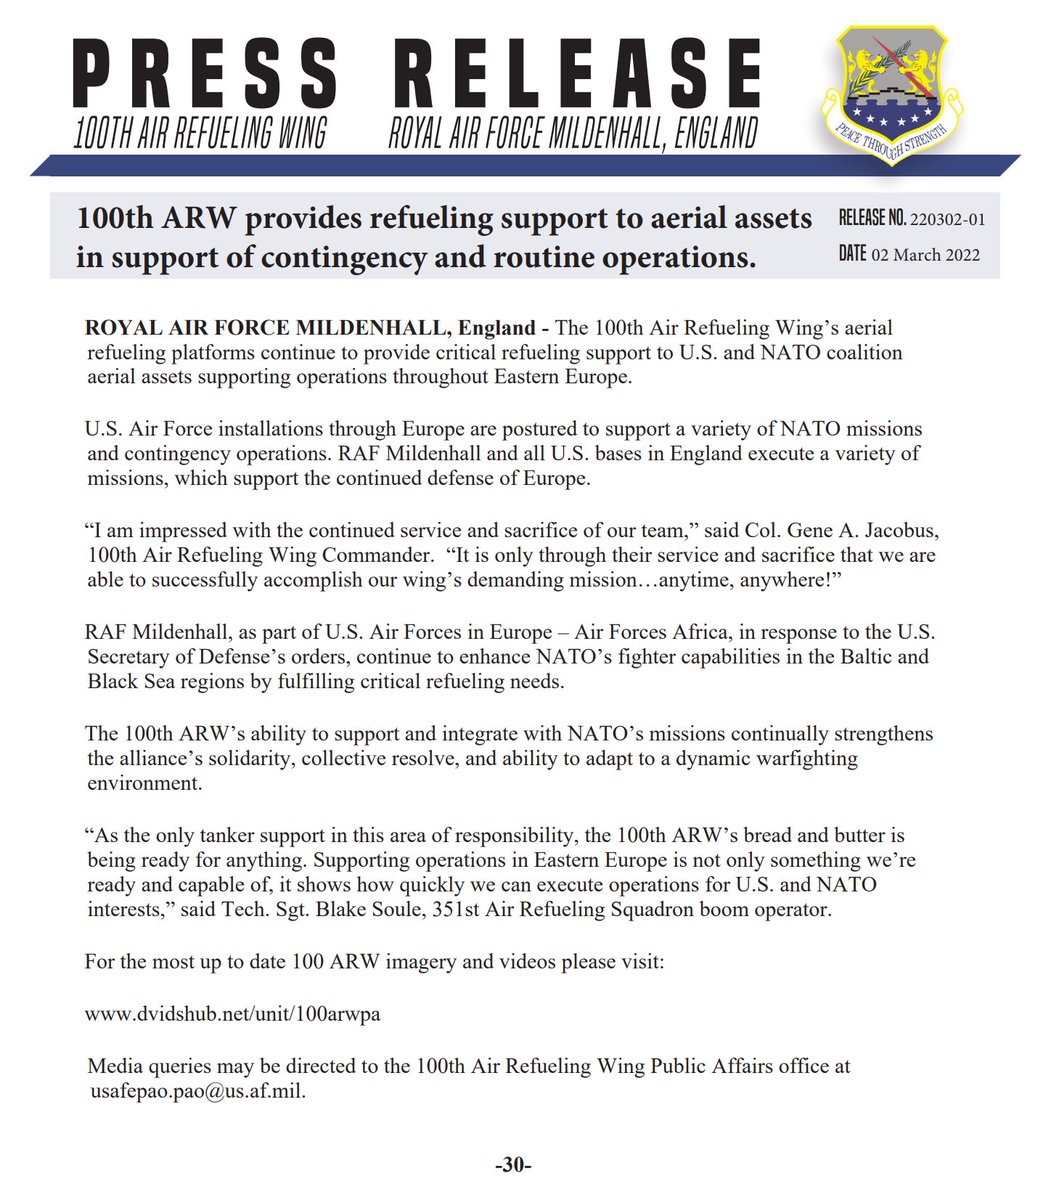 For insight on RAF Mildenhall's role in operations in Eastern Europe, see the press release below: 👇 go.usa.gov/xzT8K